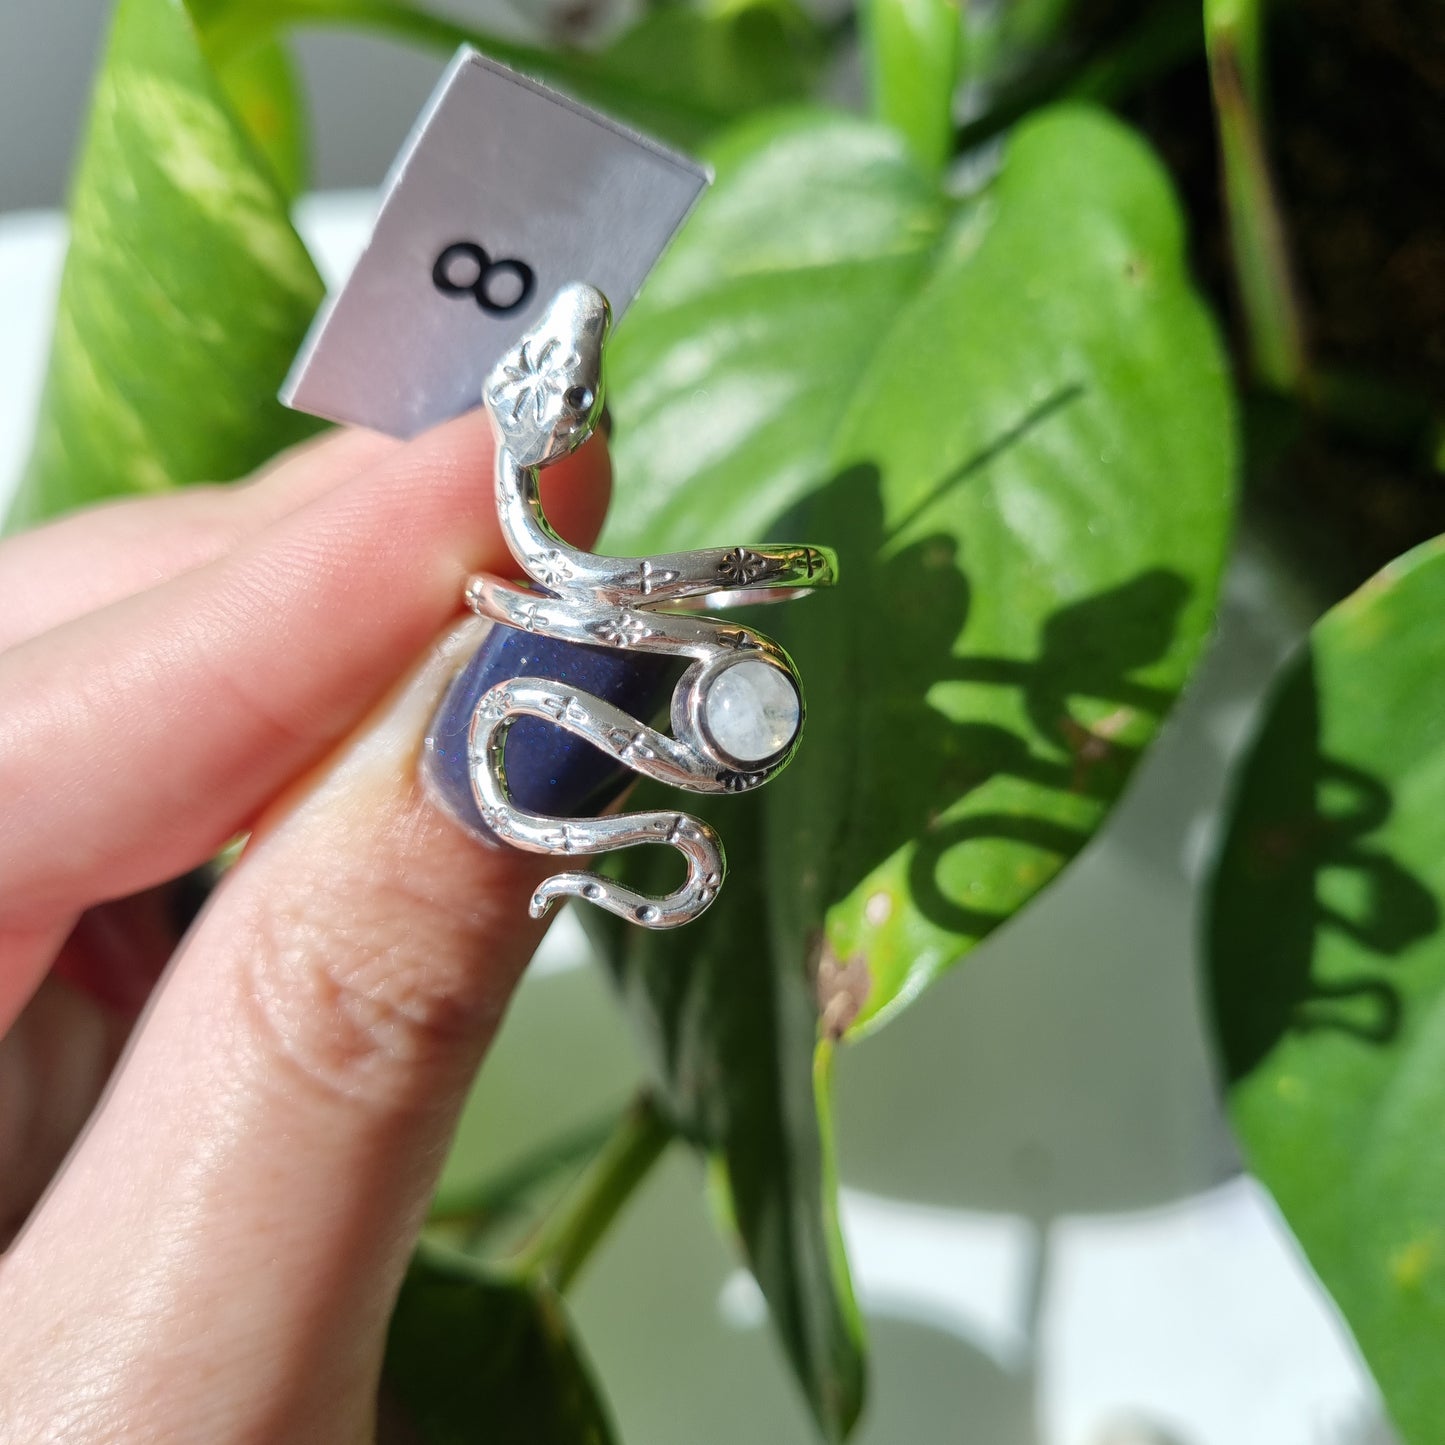 Moonstone Serpent Ring - Sparrow and Fox